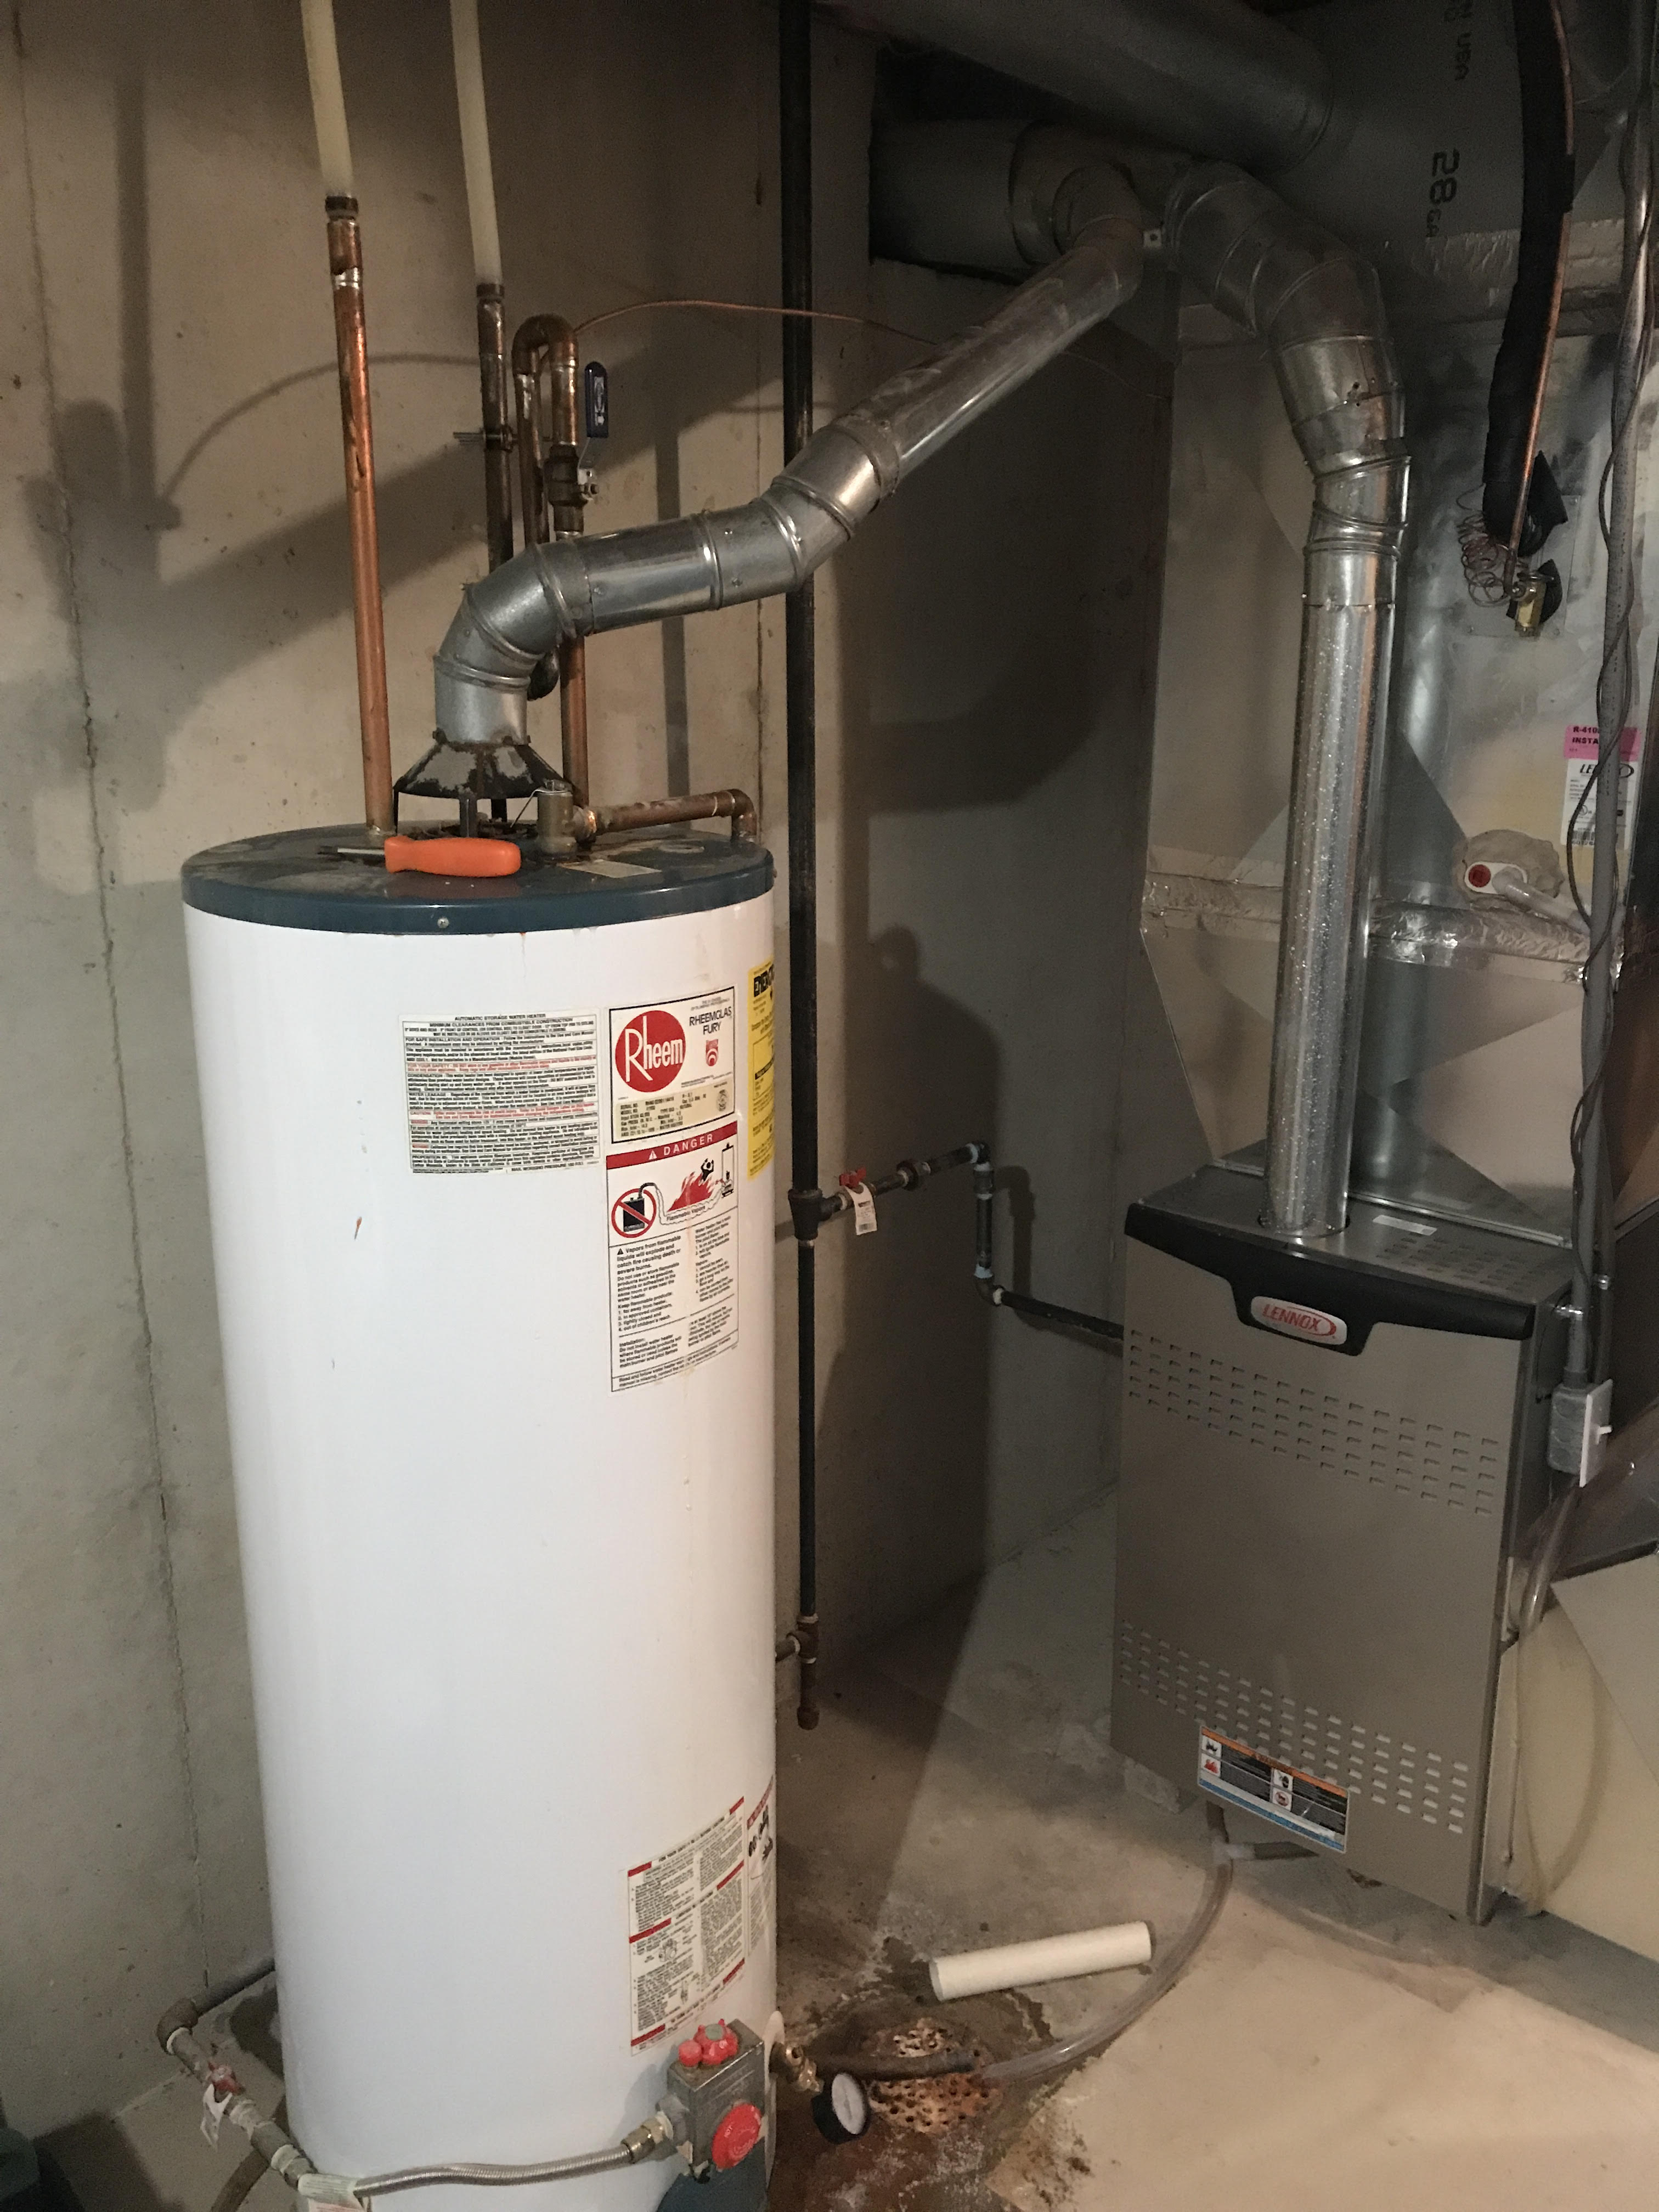 water heater installed heaters gas tank installation valve repair vented install replace pressure should cost plumber licensed kcwaterheater properly element